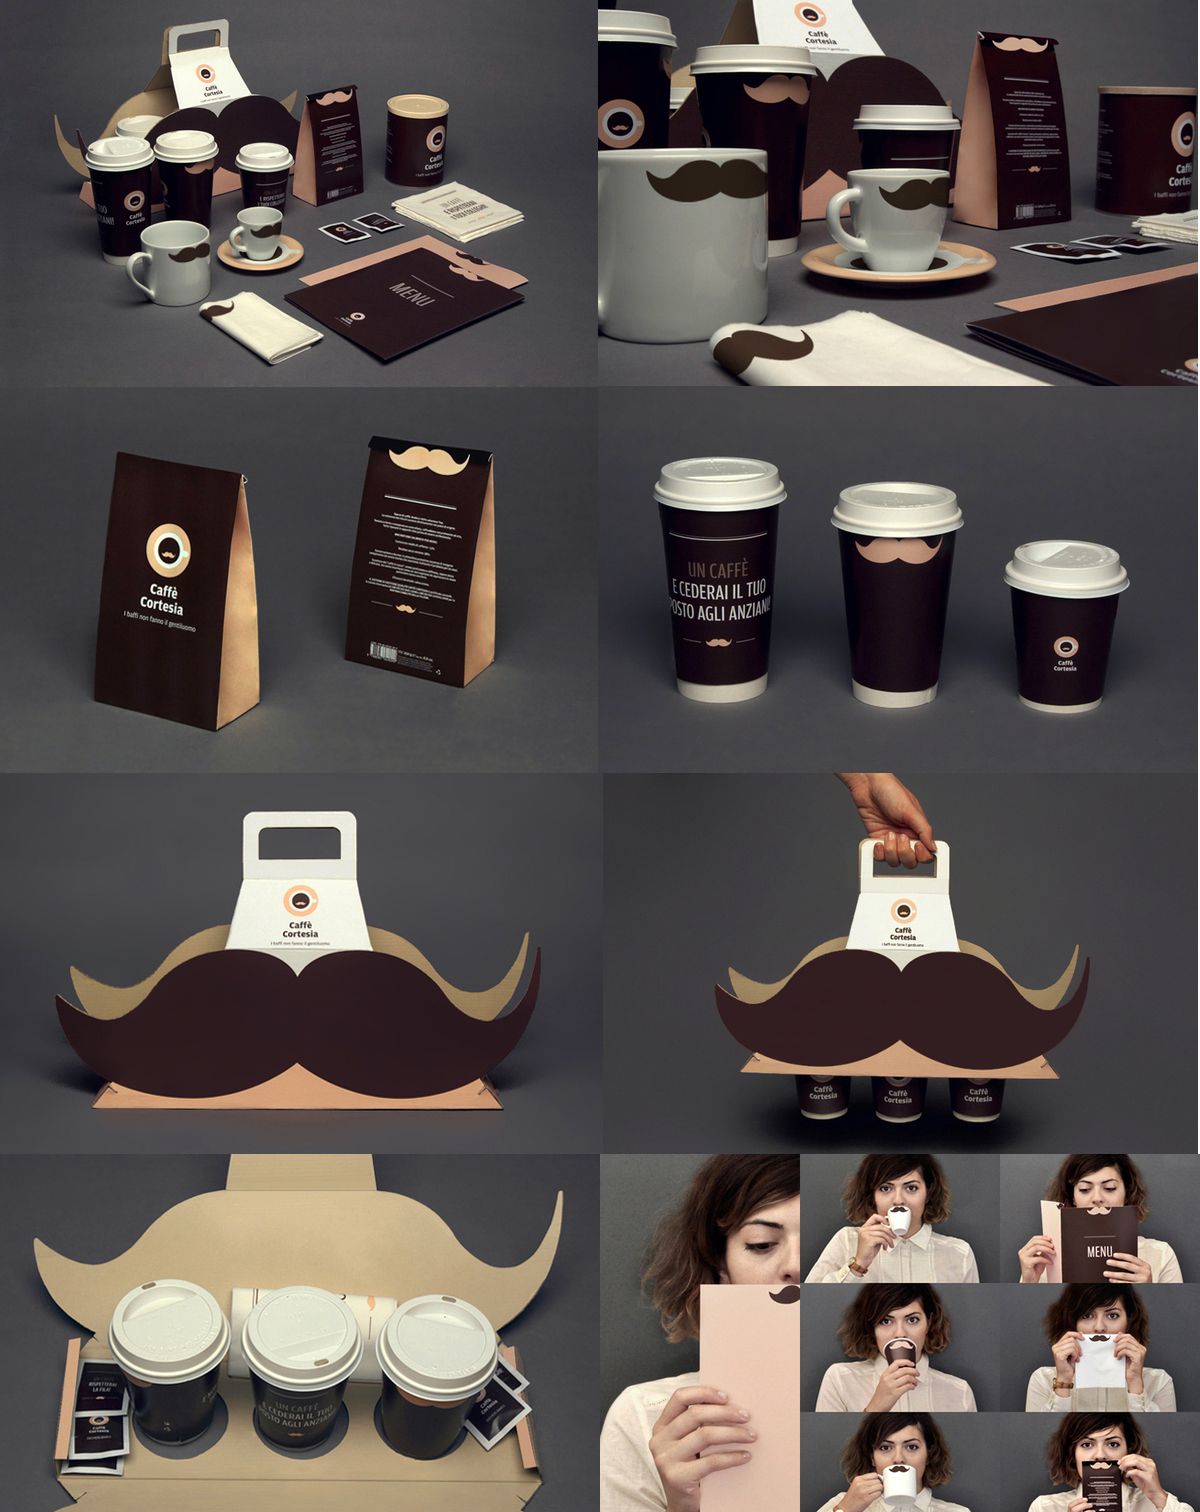 functional and funny coffeee cup carrier. plays off the trend of the mustaches b